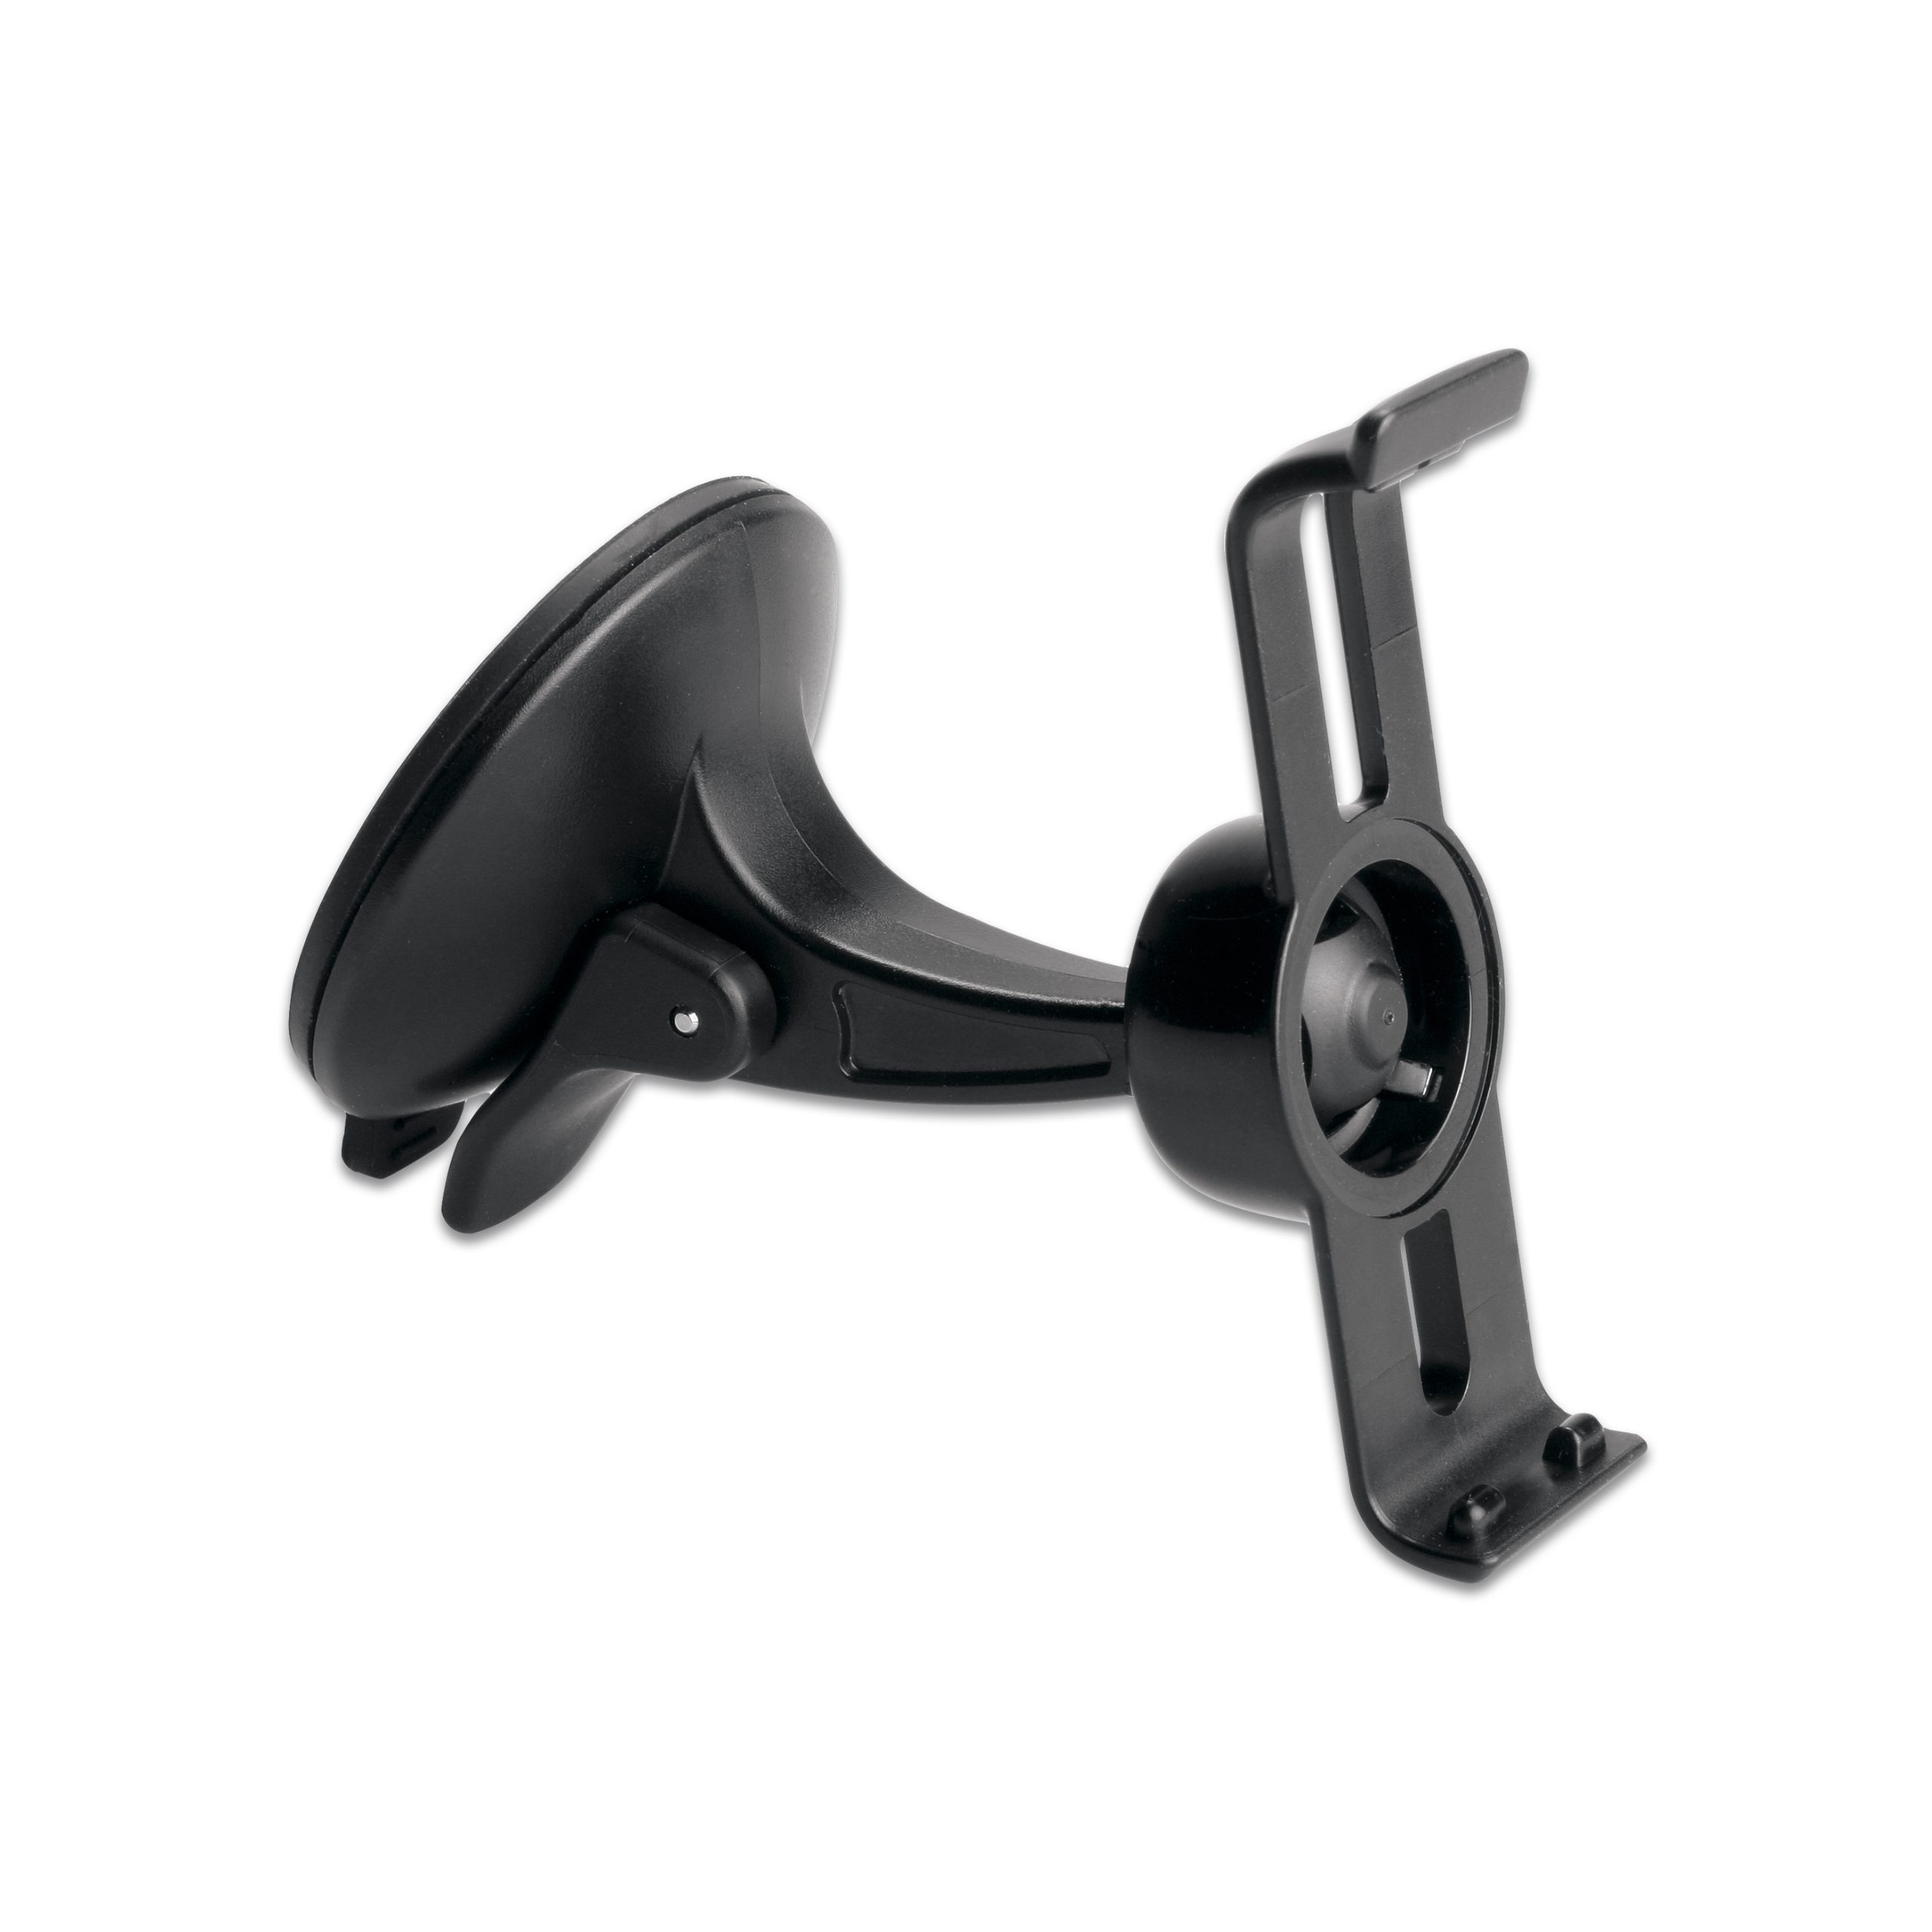 Suction Mount for Garmin nuvi 1200 & 1300 Series Units – Central